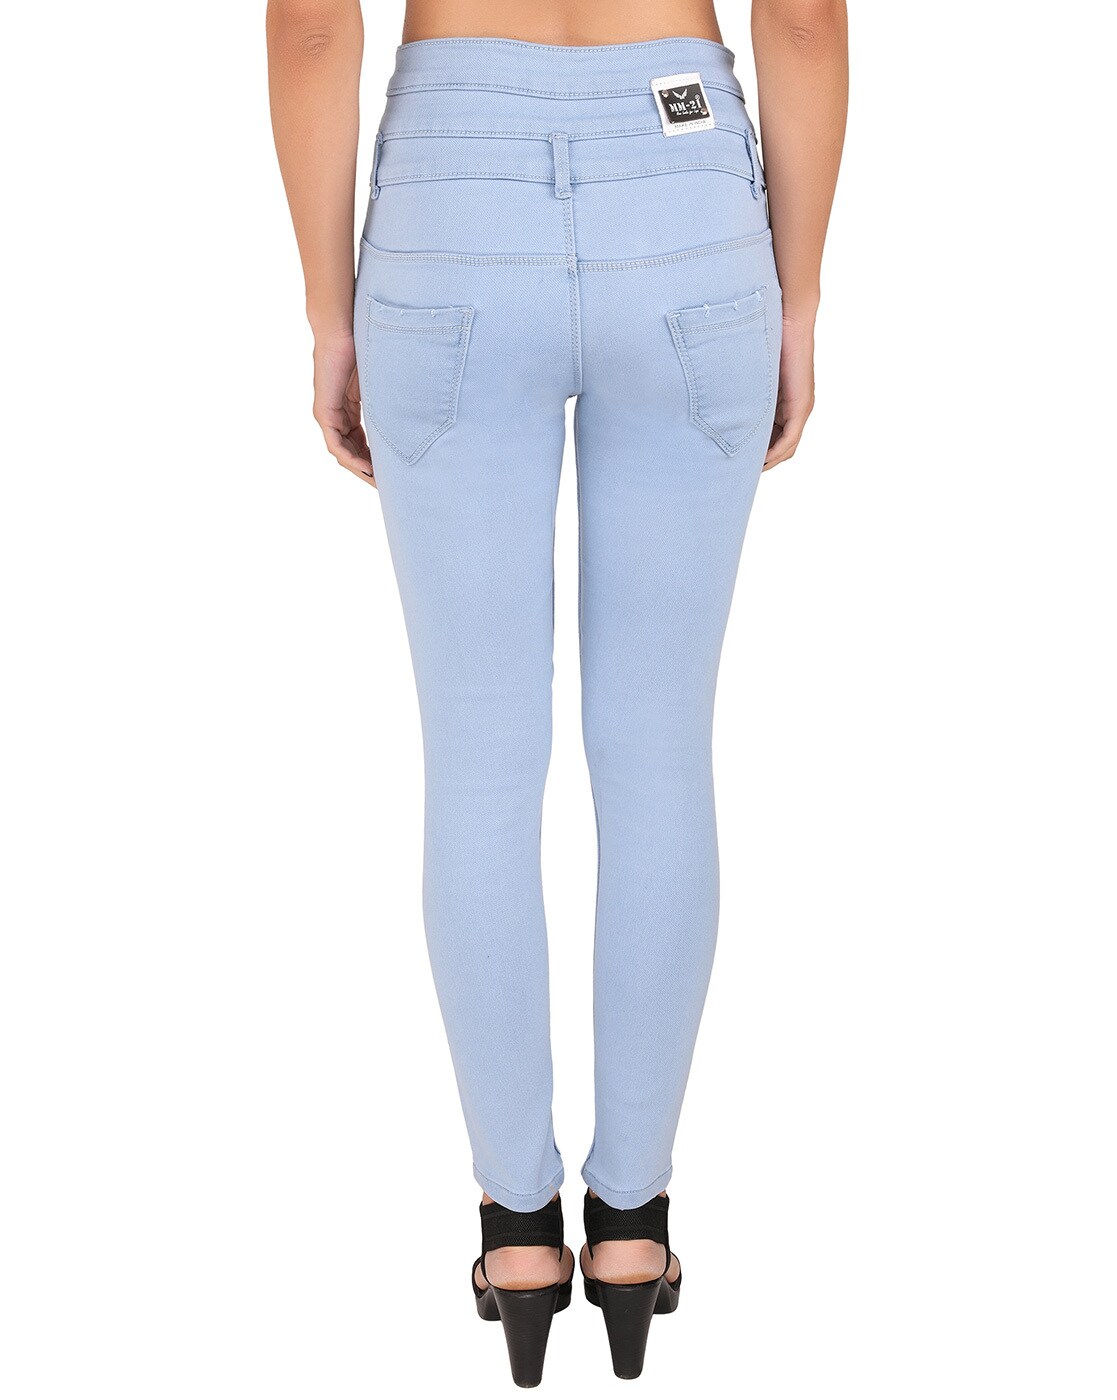 MM-21 Skinny Navy Blue Jeans For Ladies at Rs 340/piece in Ahmedabad